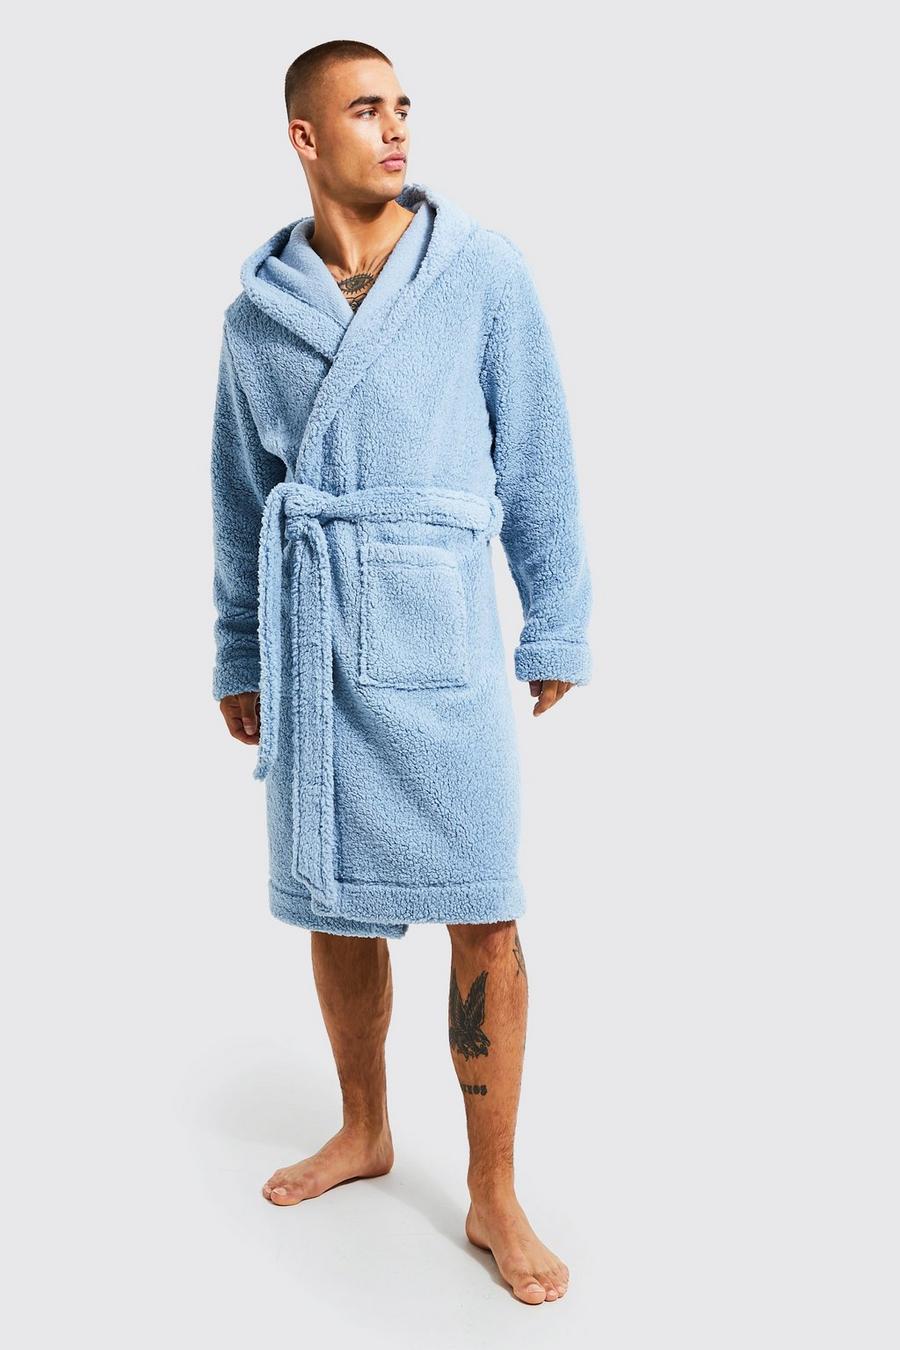 Mens Fluffy Dressing Gown | escapeauthority.com